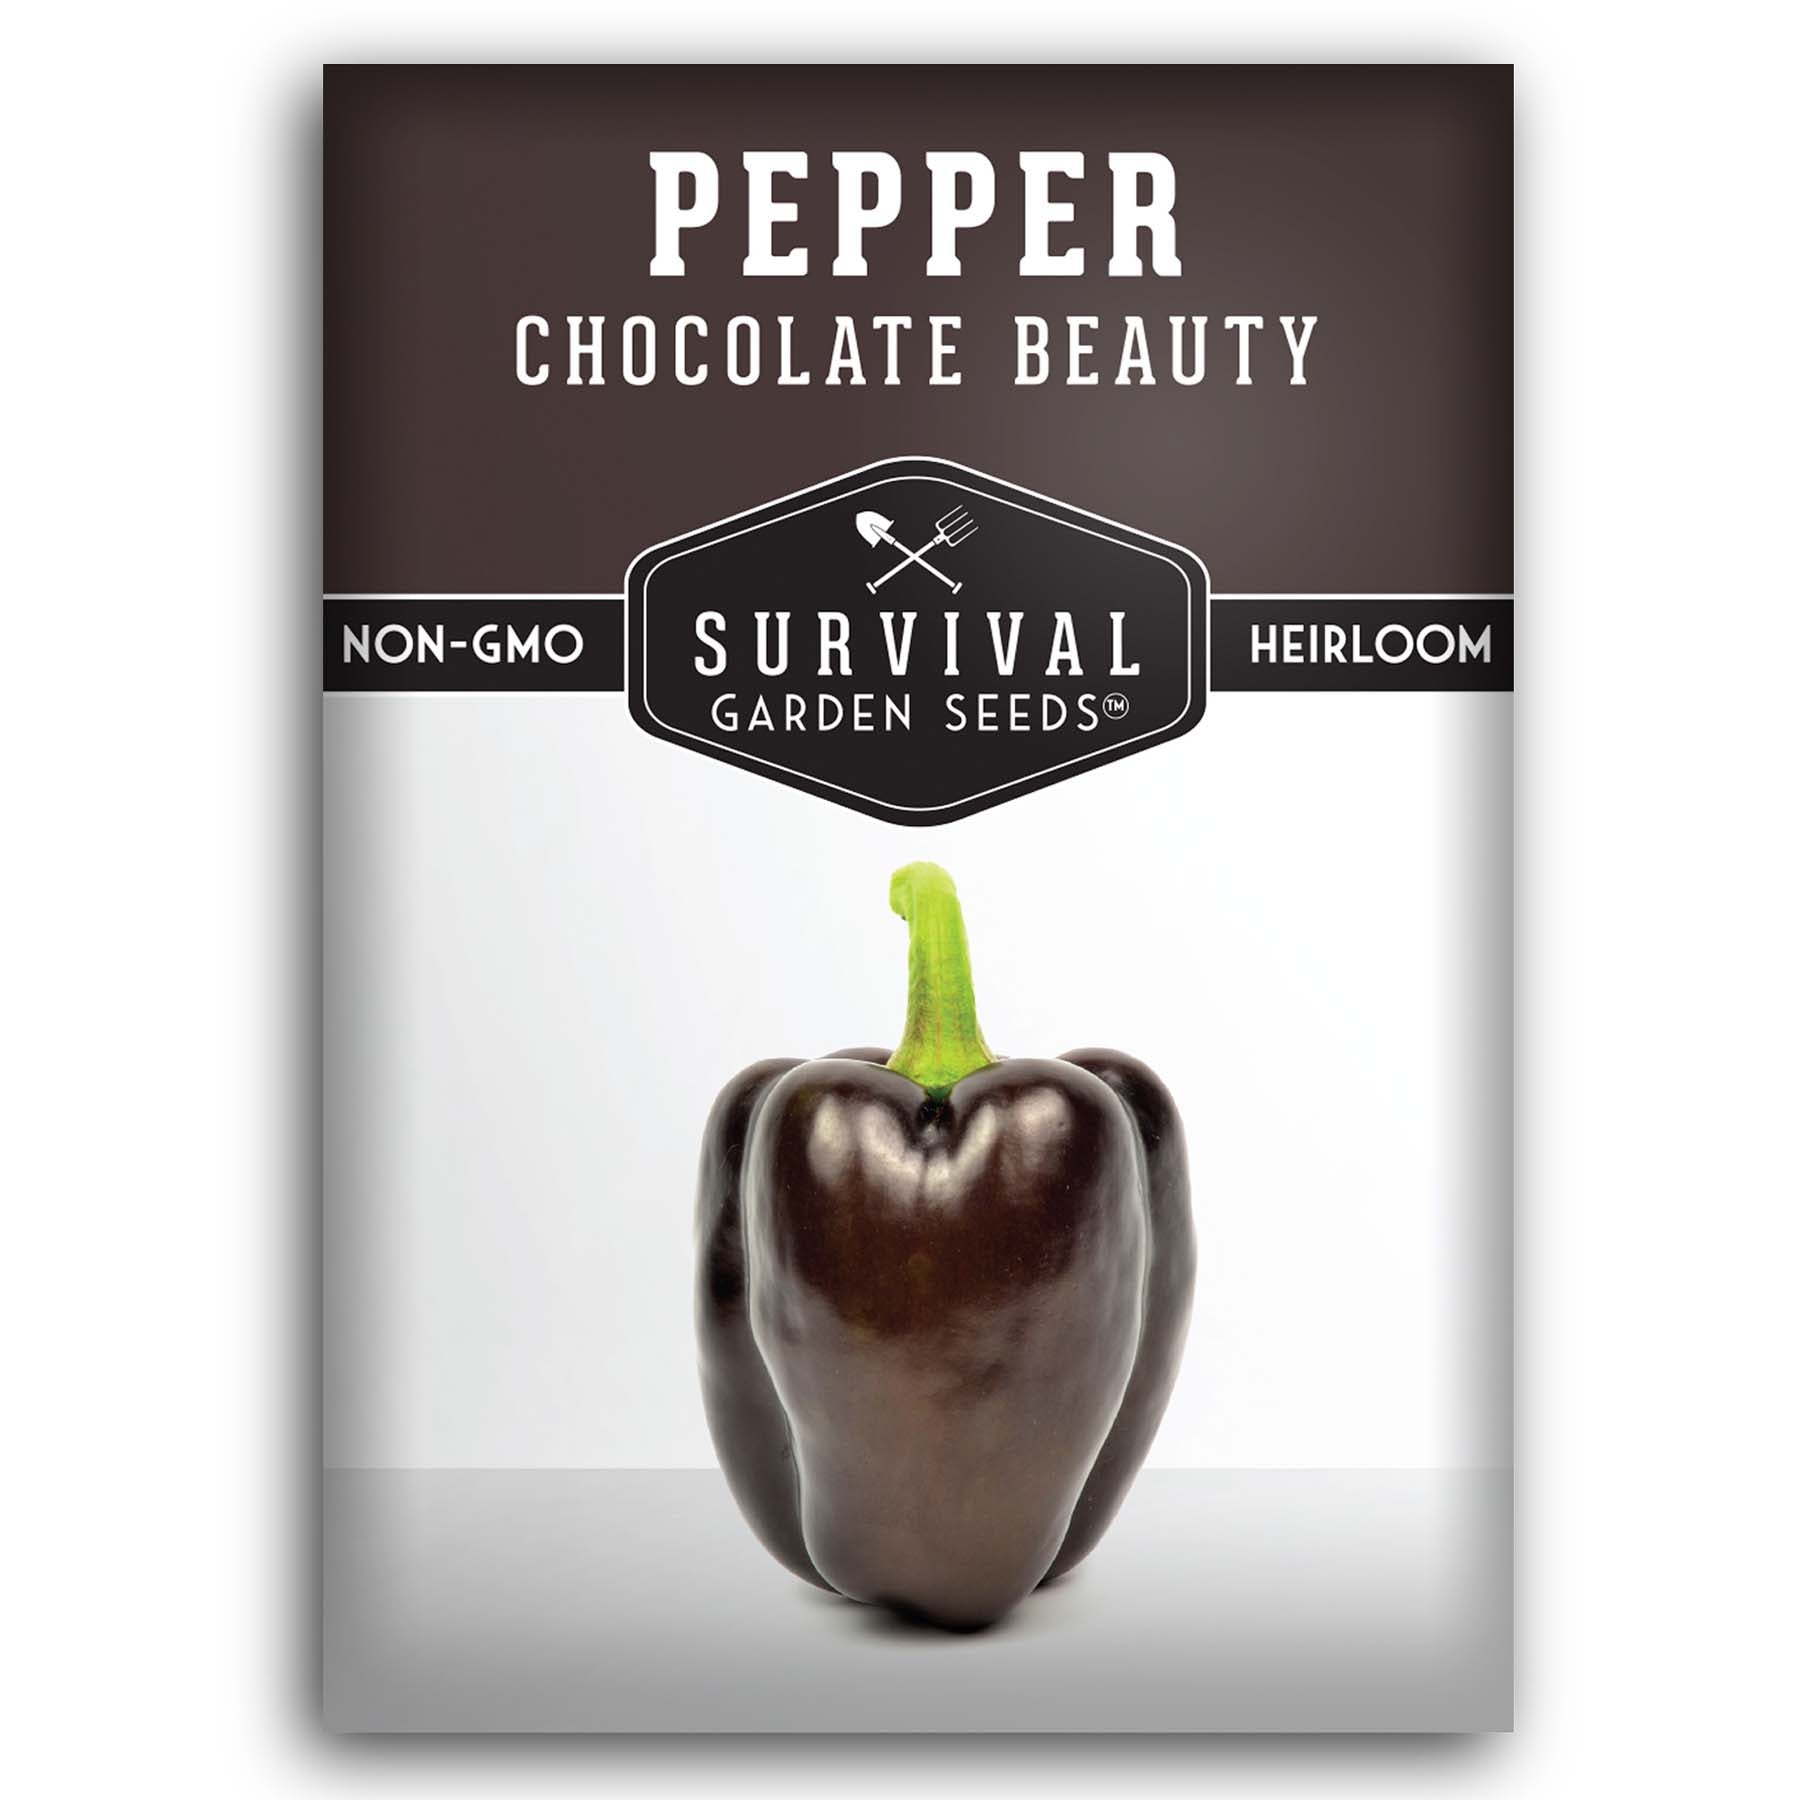 Chocolate Beauty Pepper seeds for planting